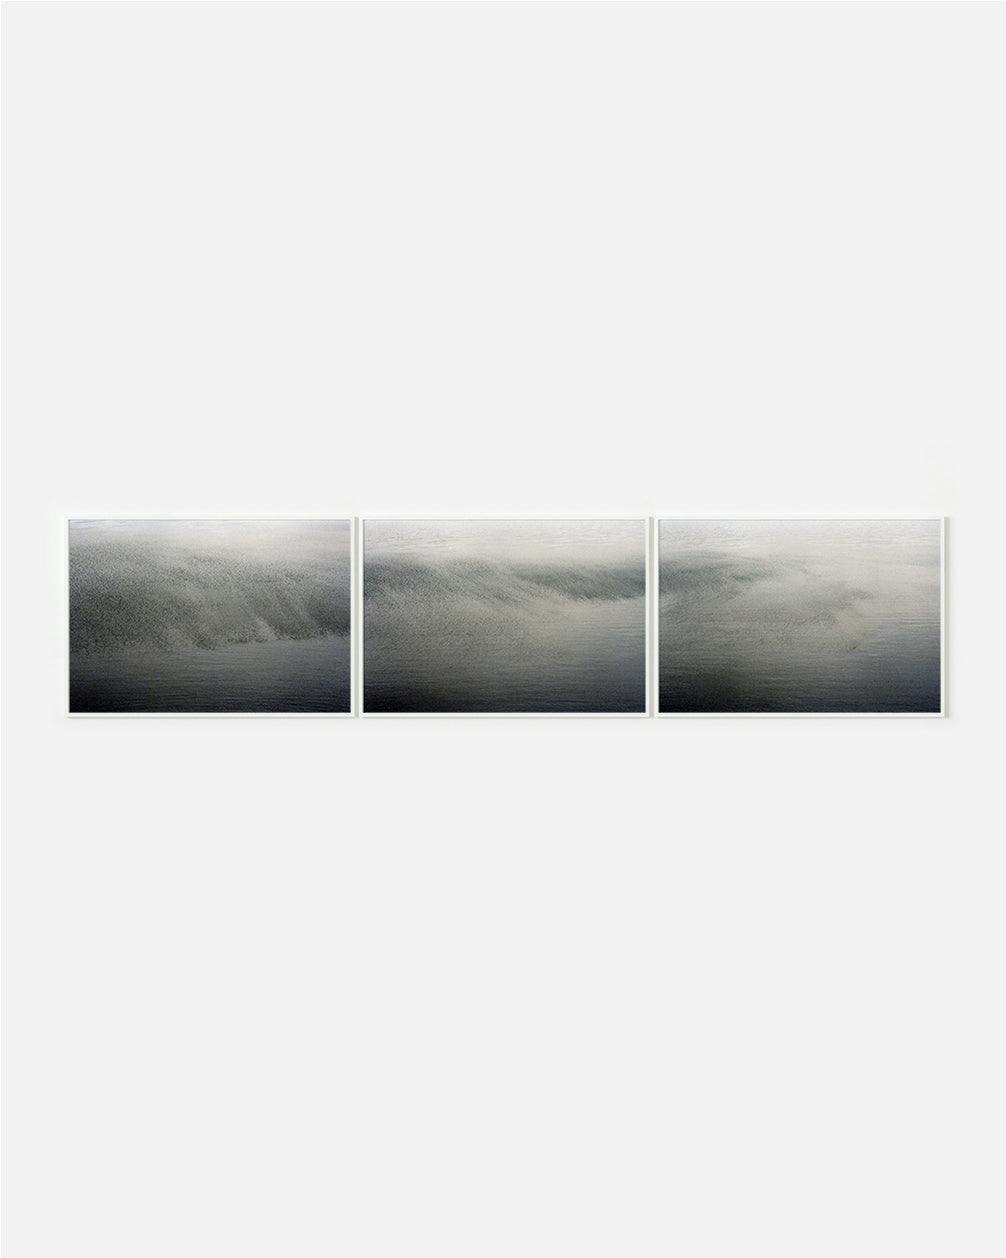 Photography by Ryan James MacFarland titled "Lake Triptych".